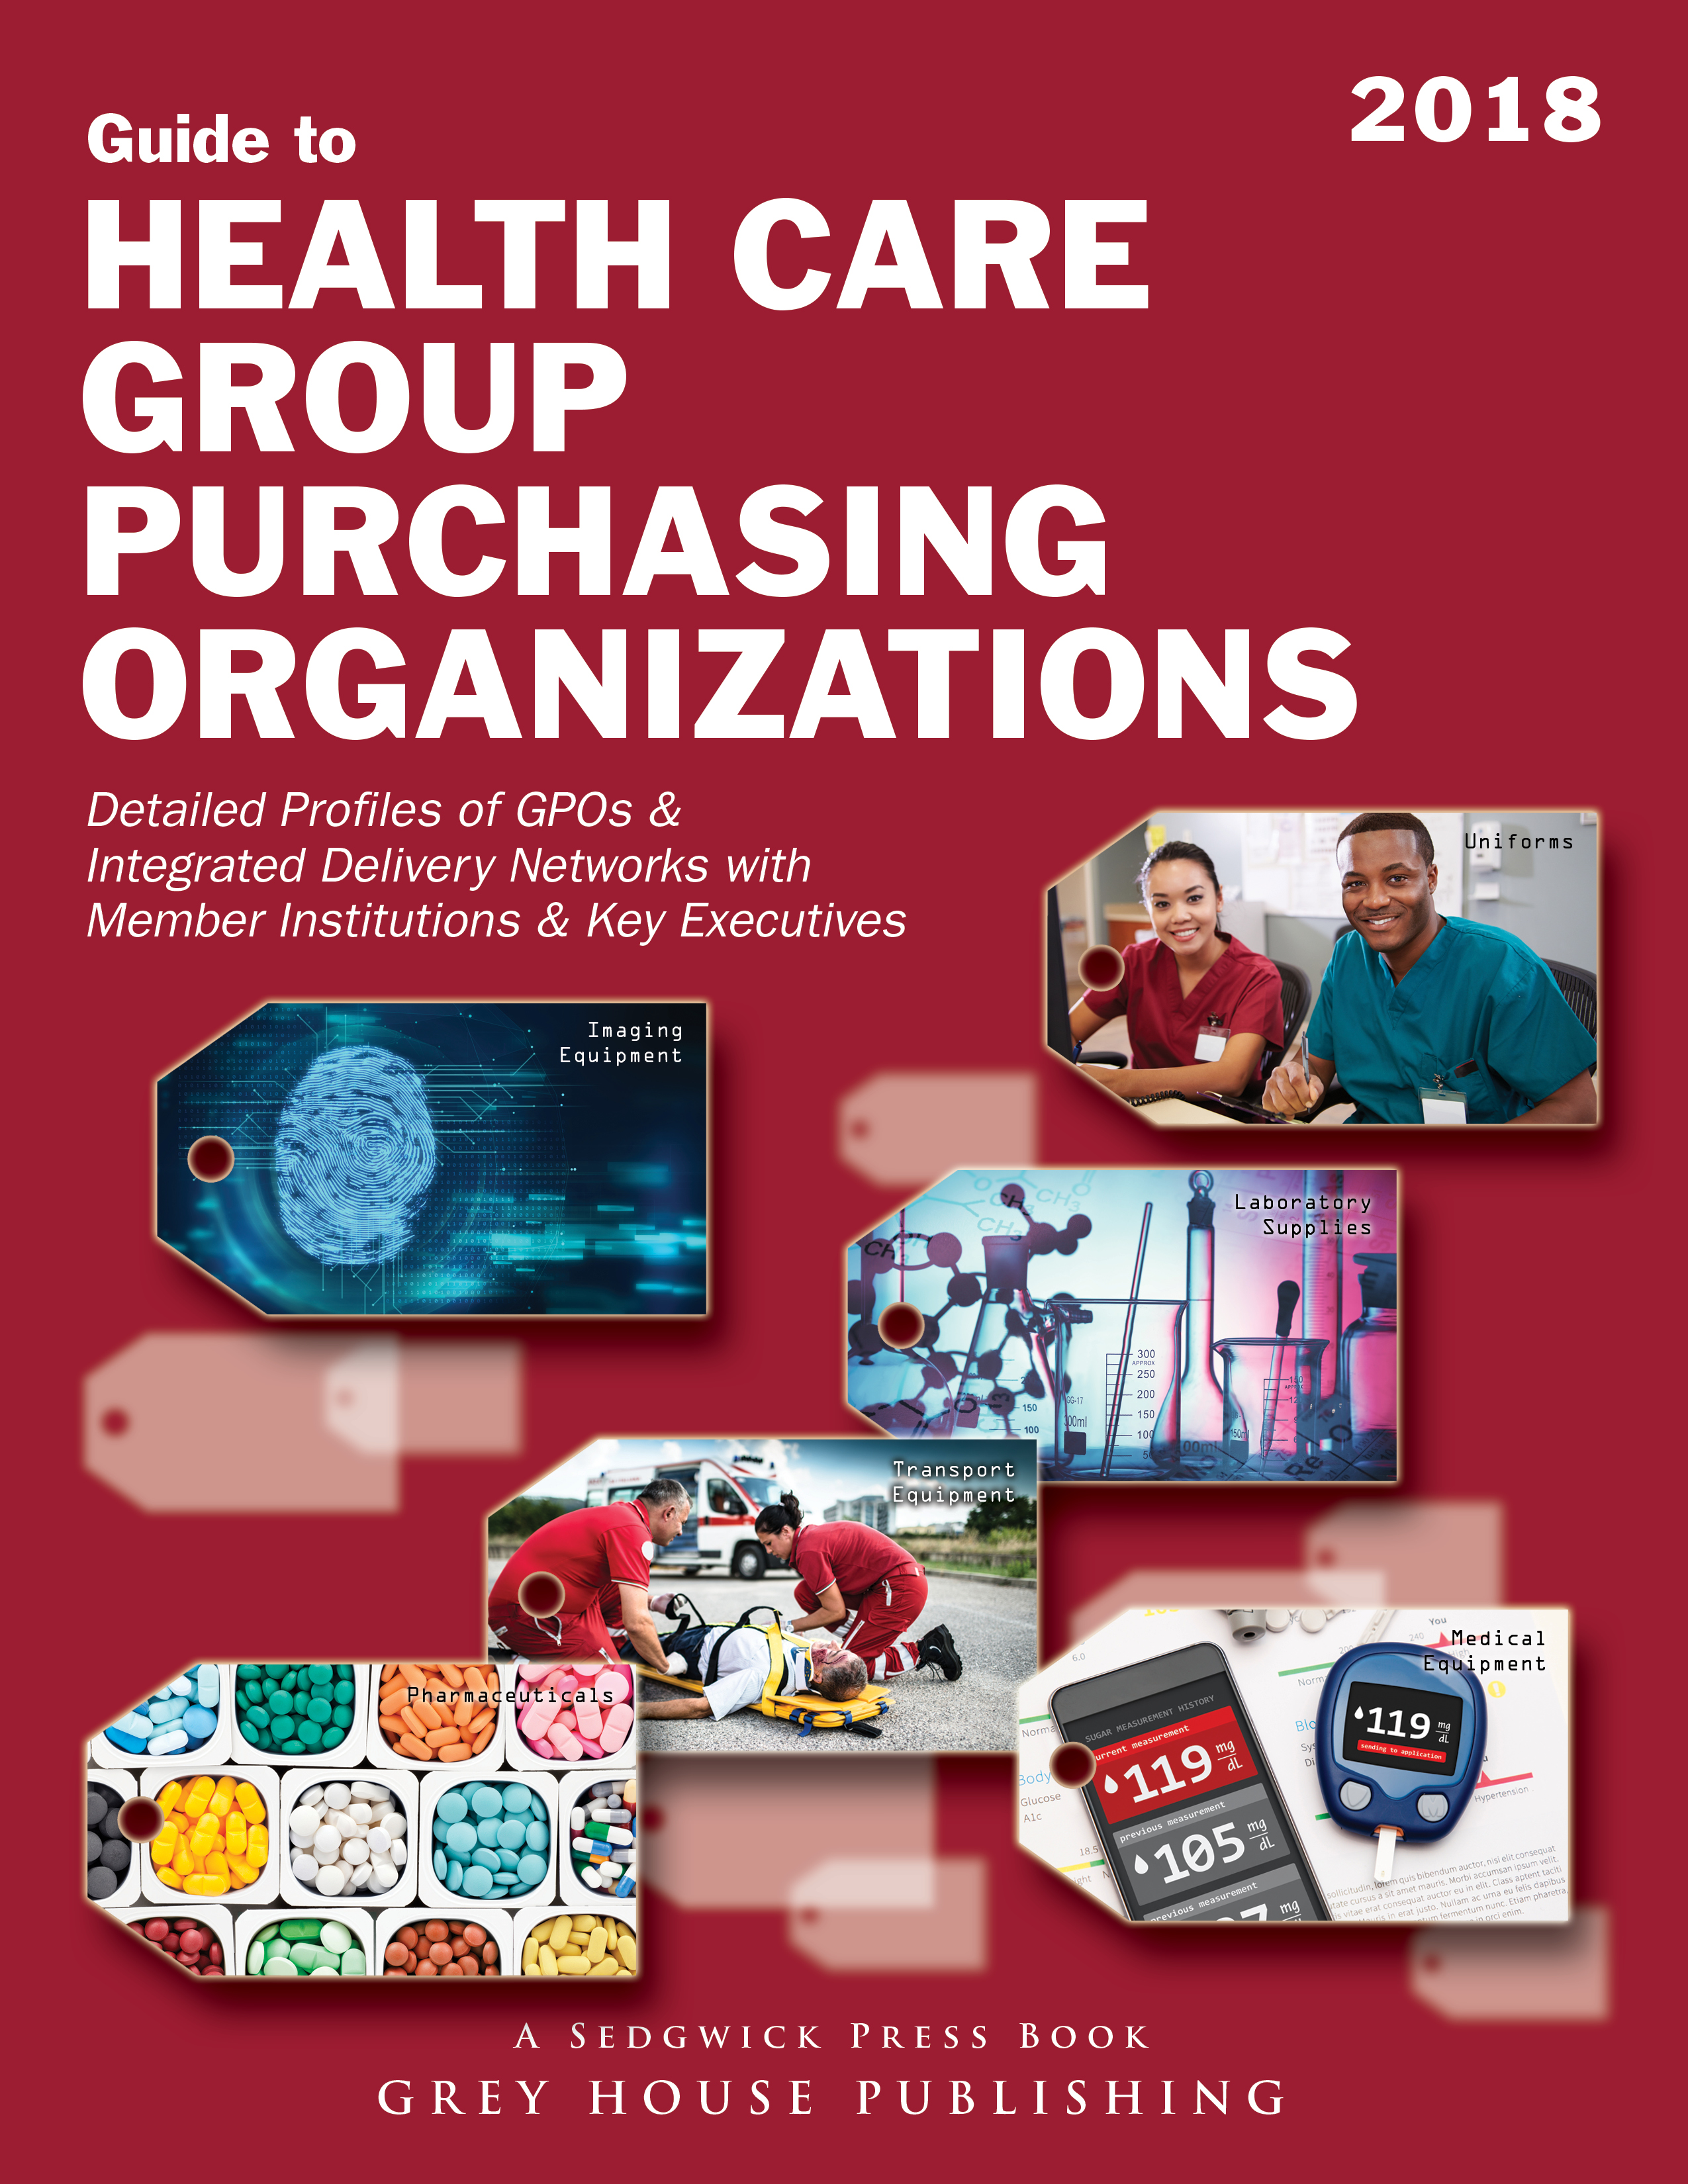 Guide to Health Care Group Purchasing Organizations